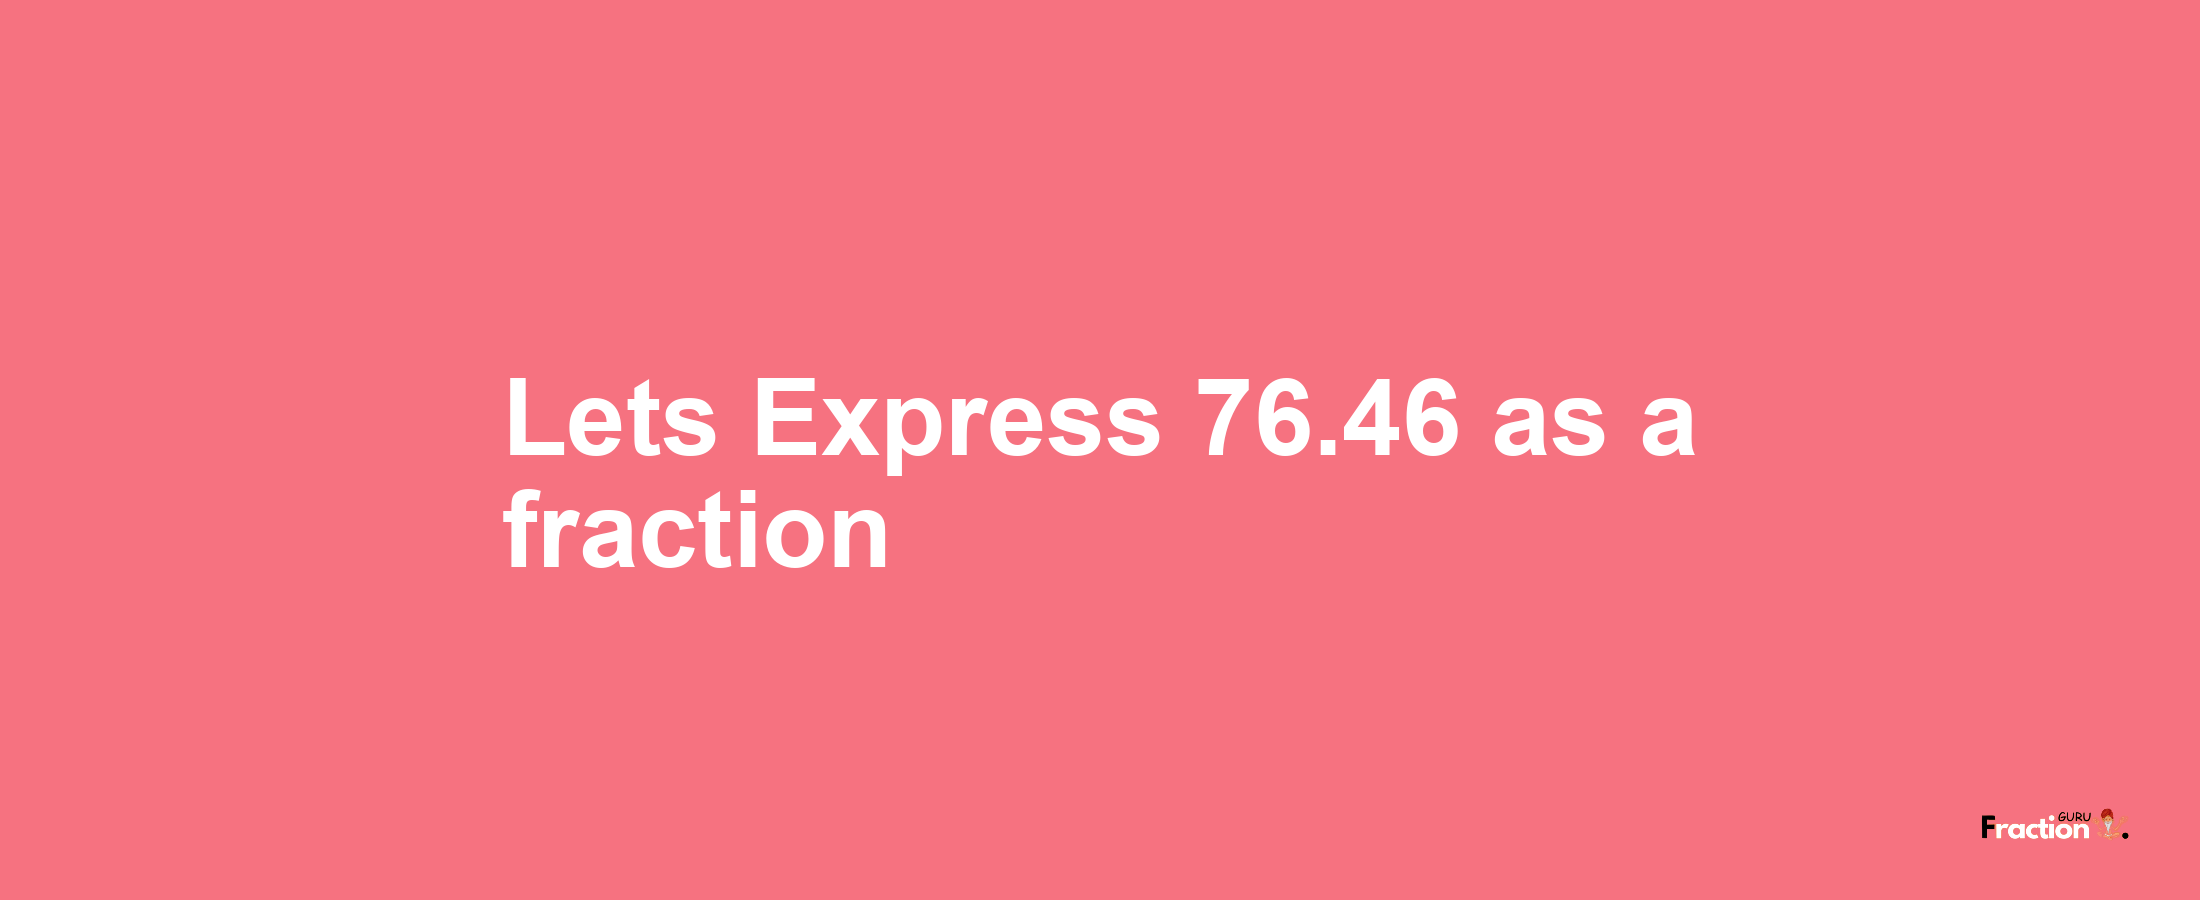 Lets Express 76.46 as afraction